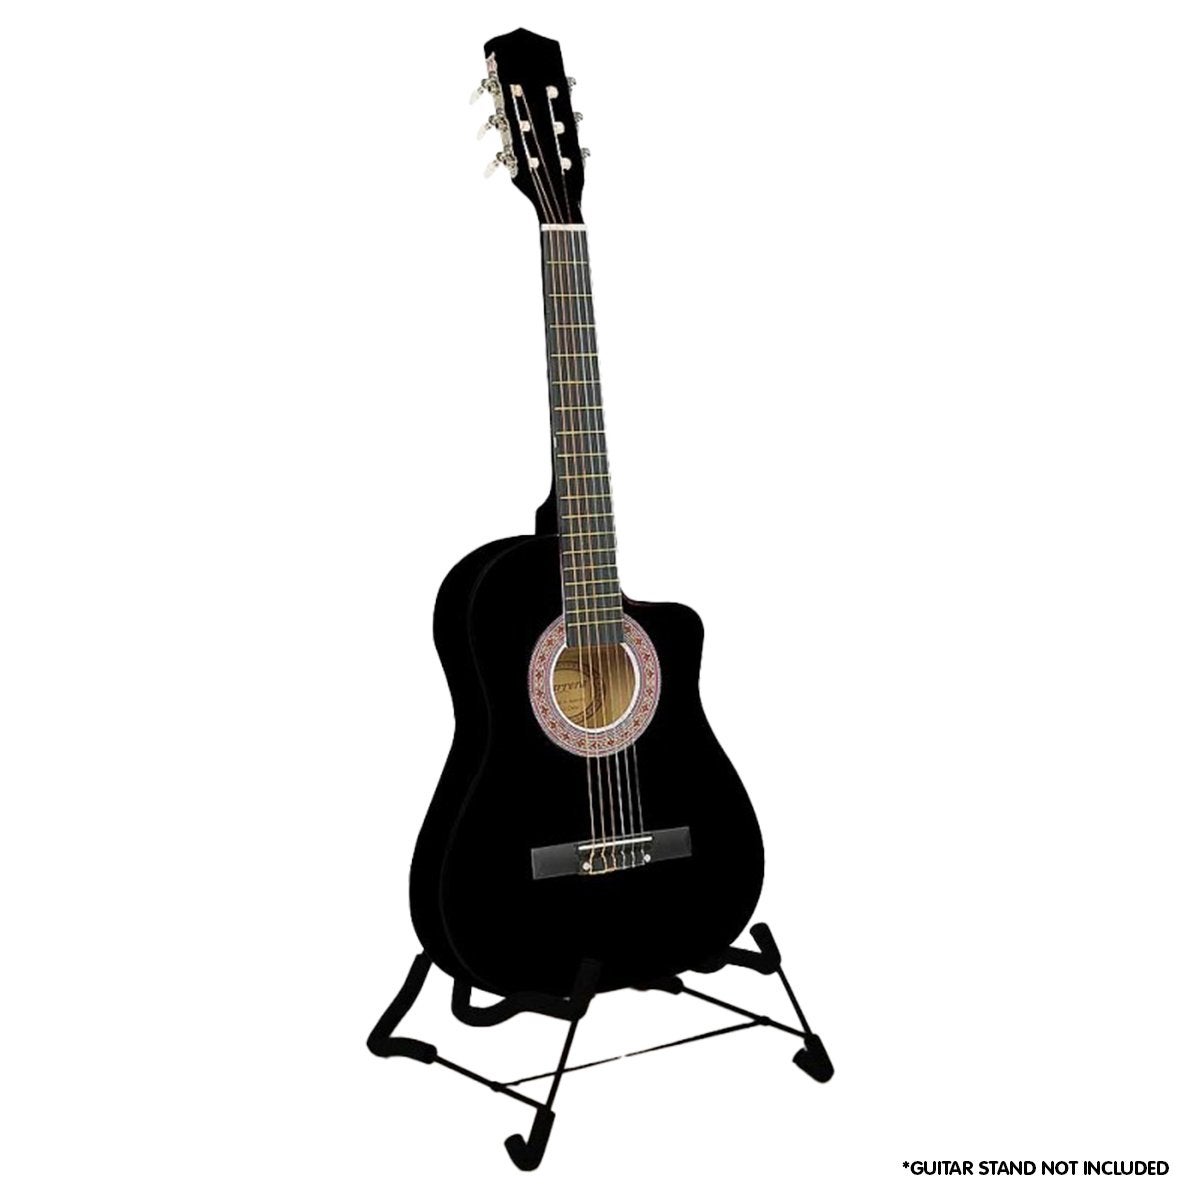 New Karrera Childrens Acoustic Cutaway Wooden Guitar Ideal Kids Gift 1/2 Size